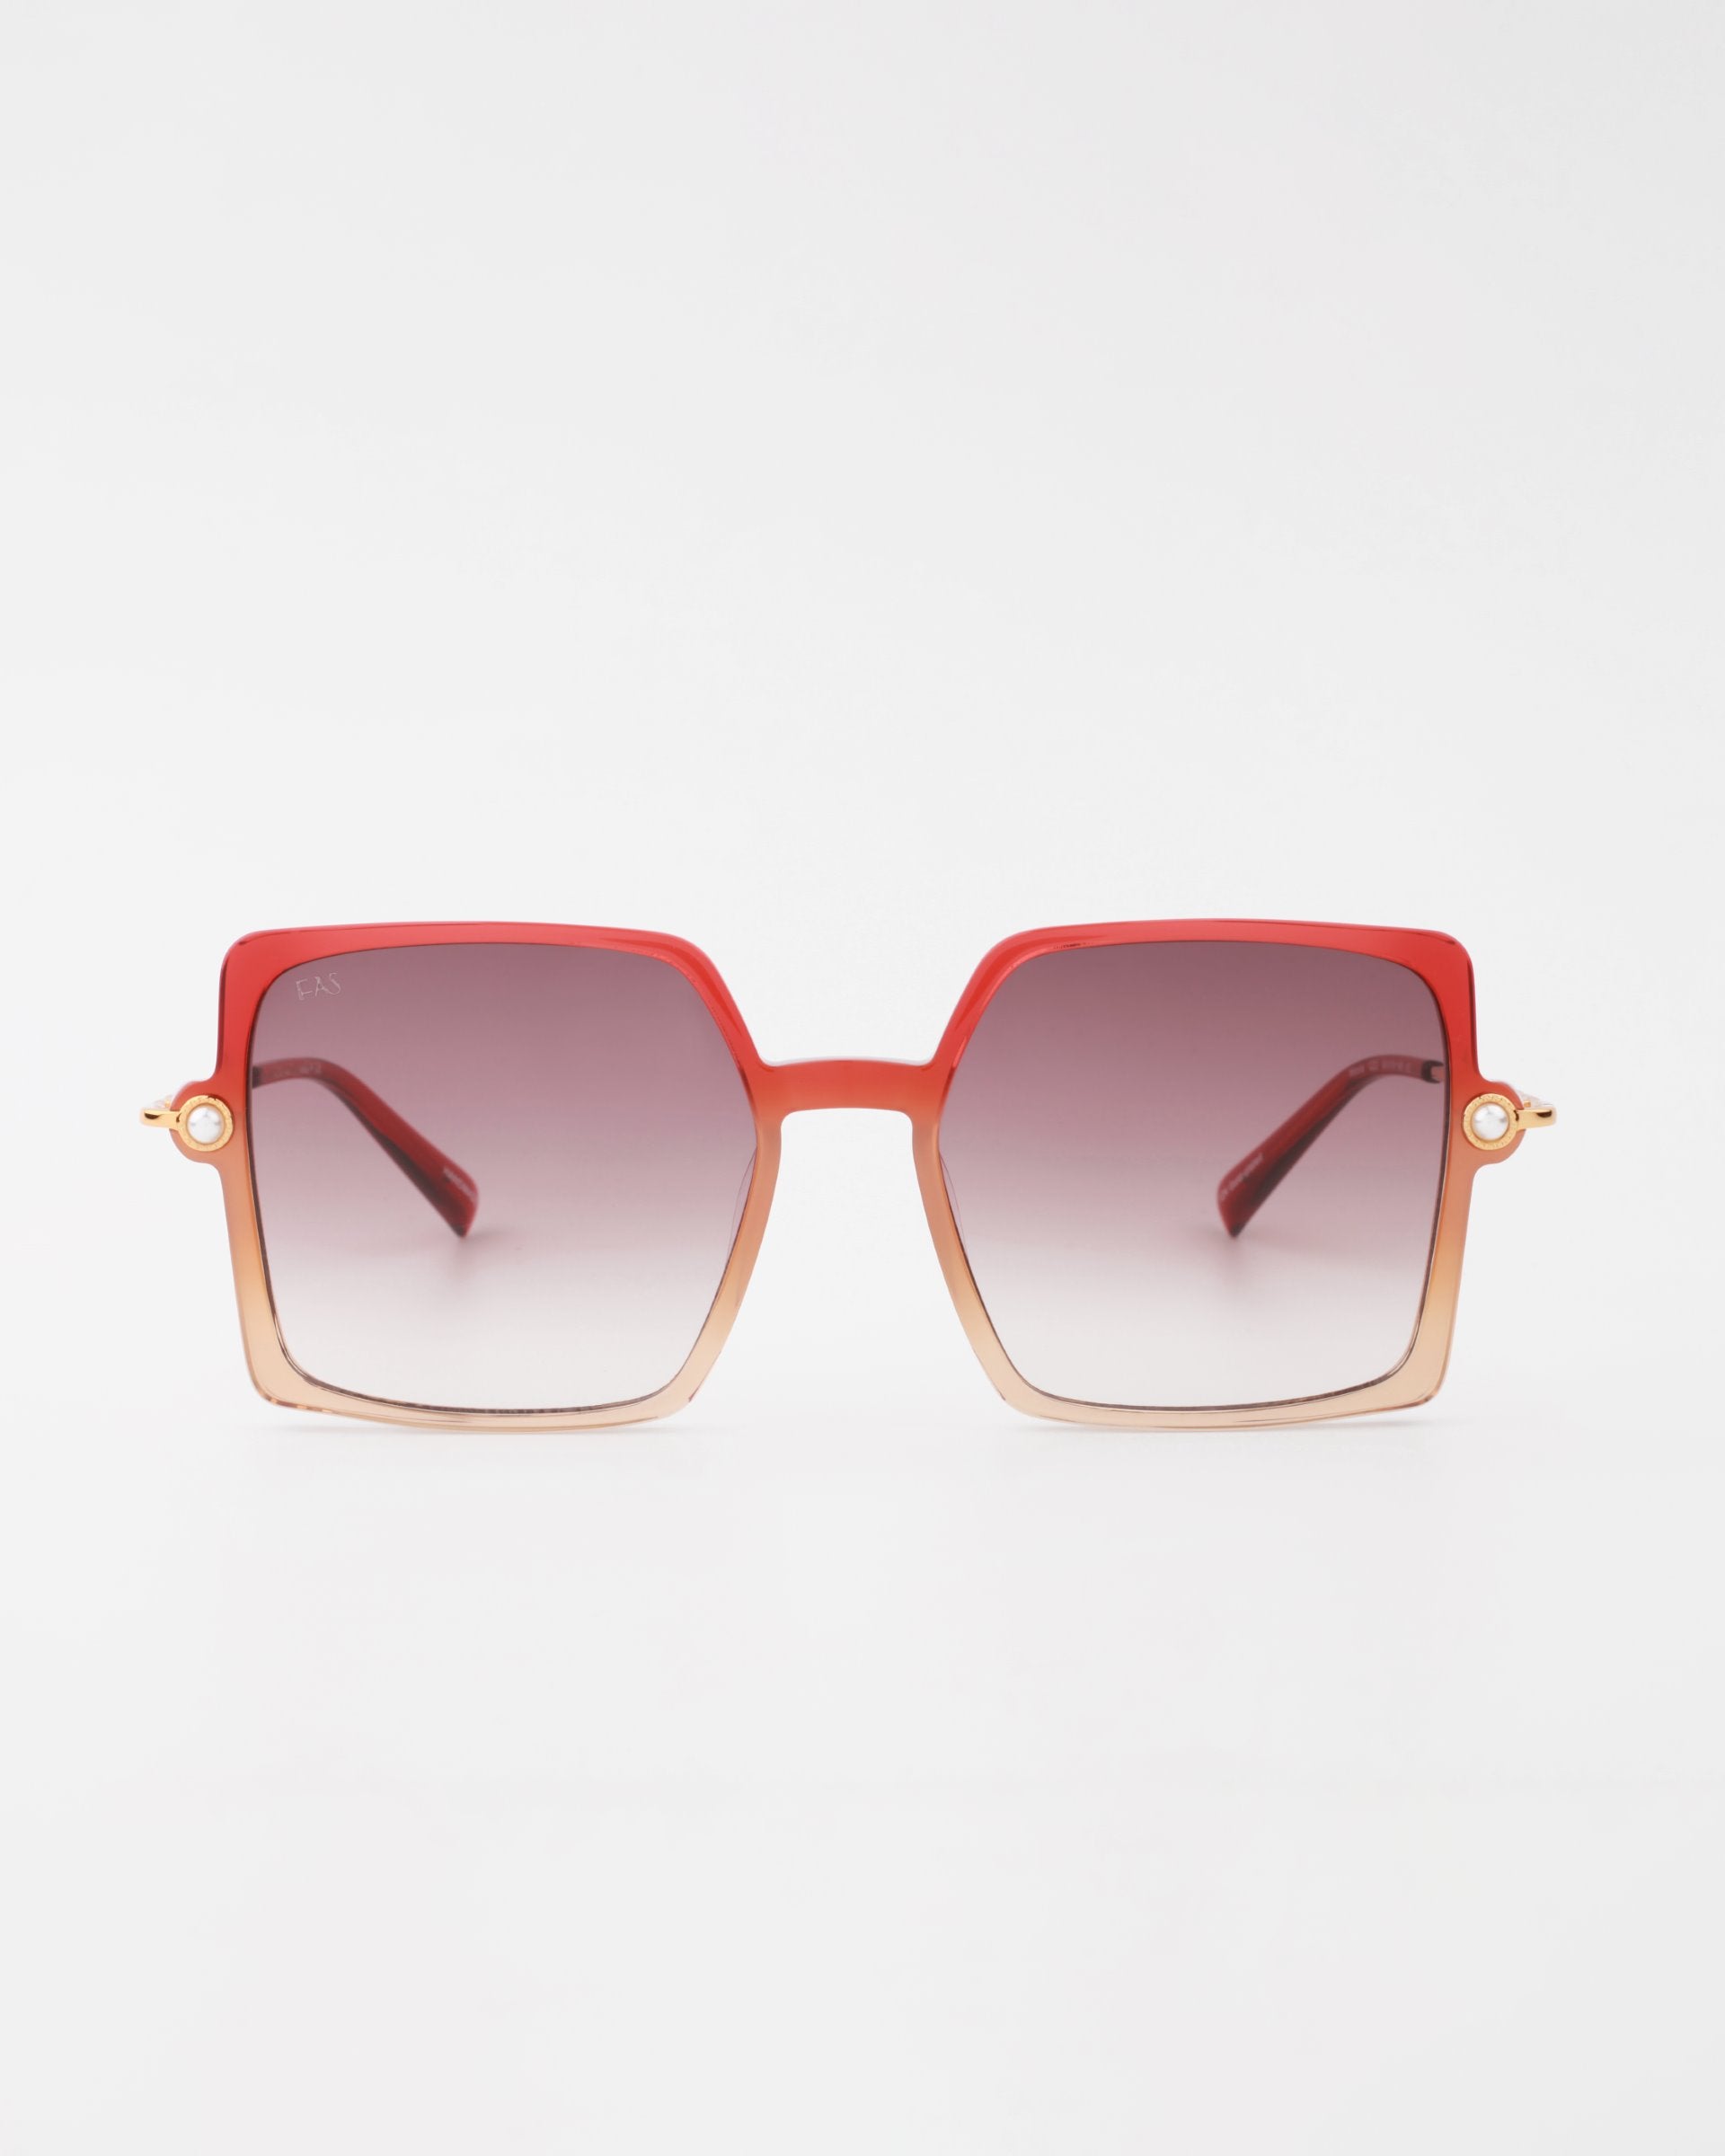 A pair of stylish handmade acetate For Art&#39;s Sake® Moxie sunglasses with large, gradient square lenses that transition from dark gray at the top to lighter shades towards the bottom. The frames are ombre, blending from red to a lighter tan hue with 18-karat gold-plated arms and offering full UVA &amp; UVB protection.